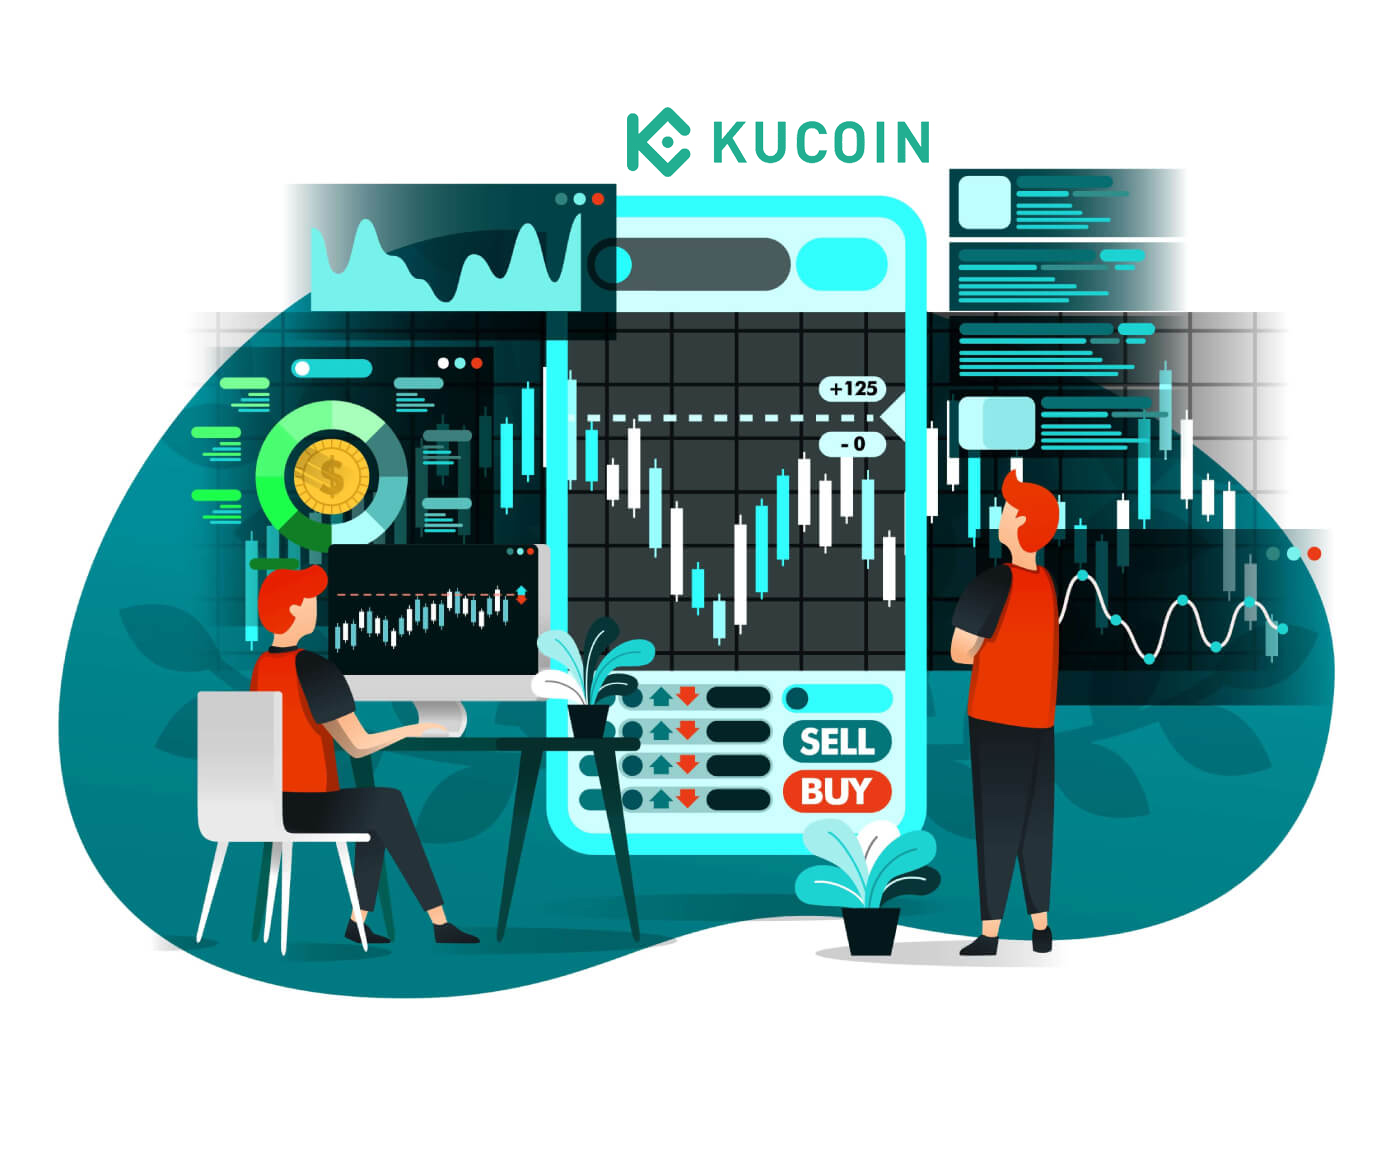 How to Start KuCoin Trading in 2022: A Step-By-Step Guide for Beginners